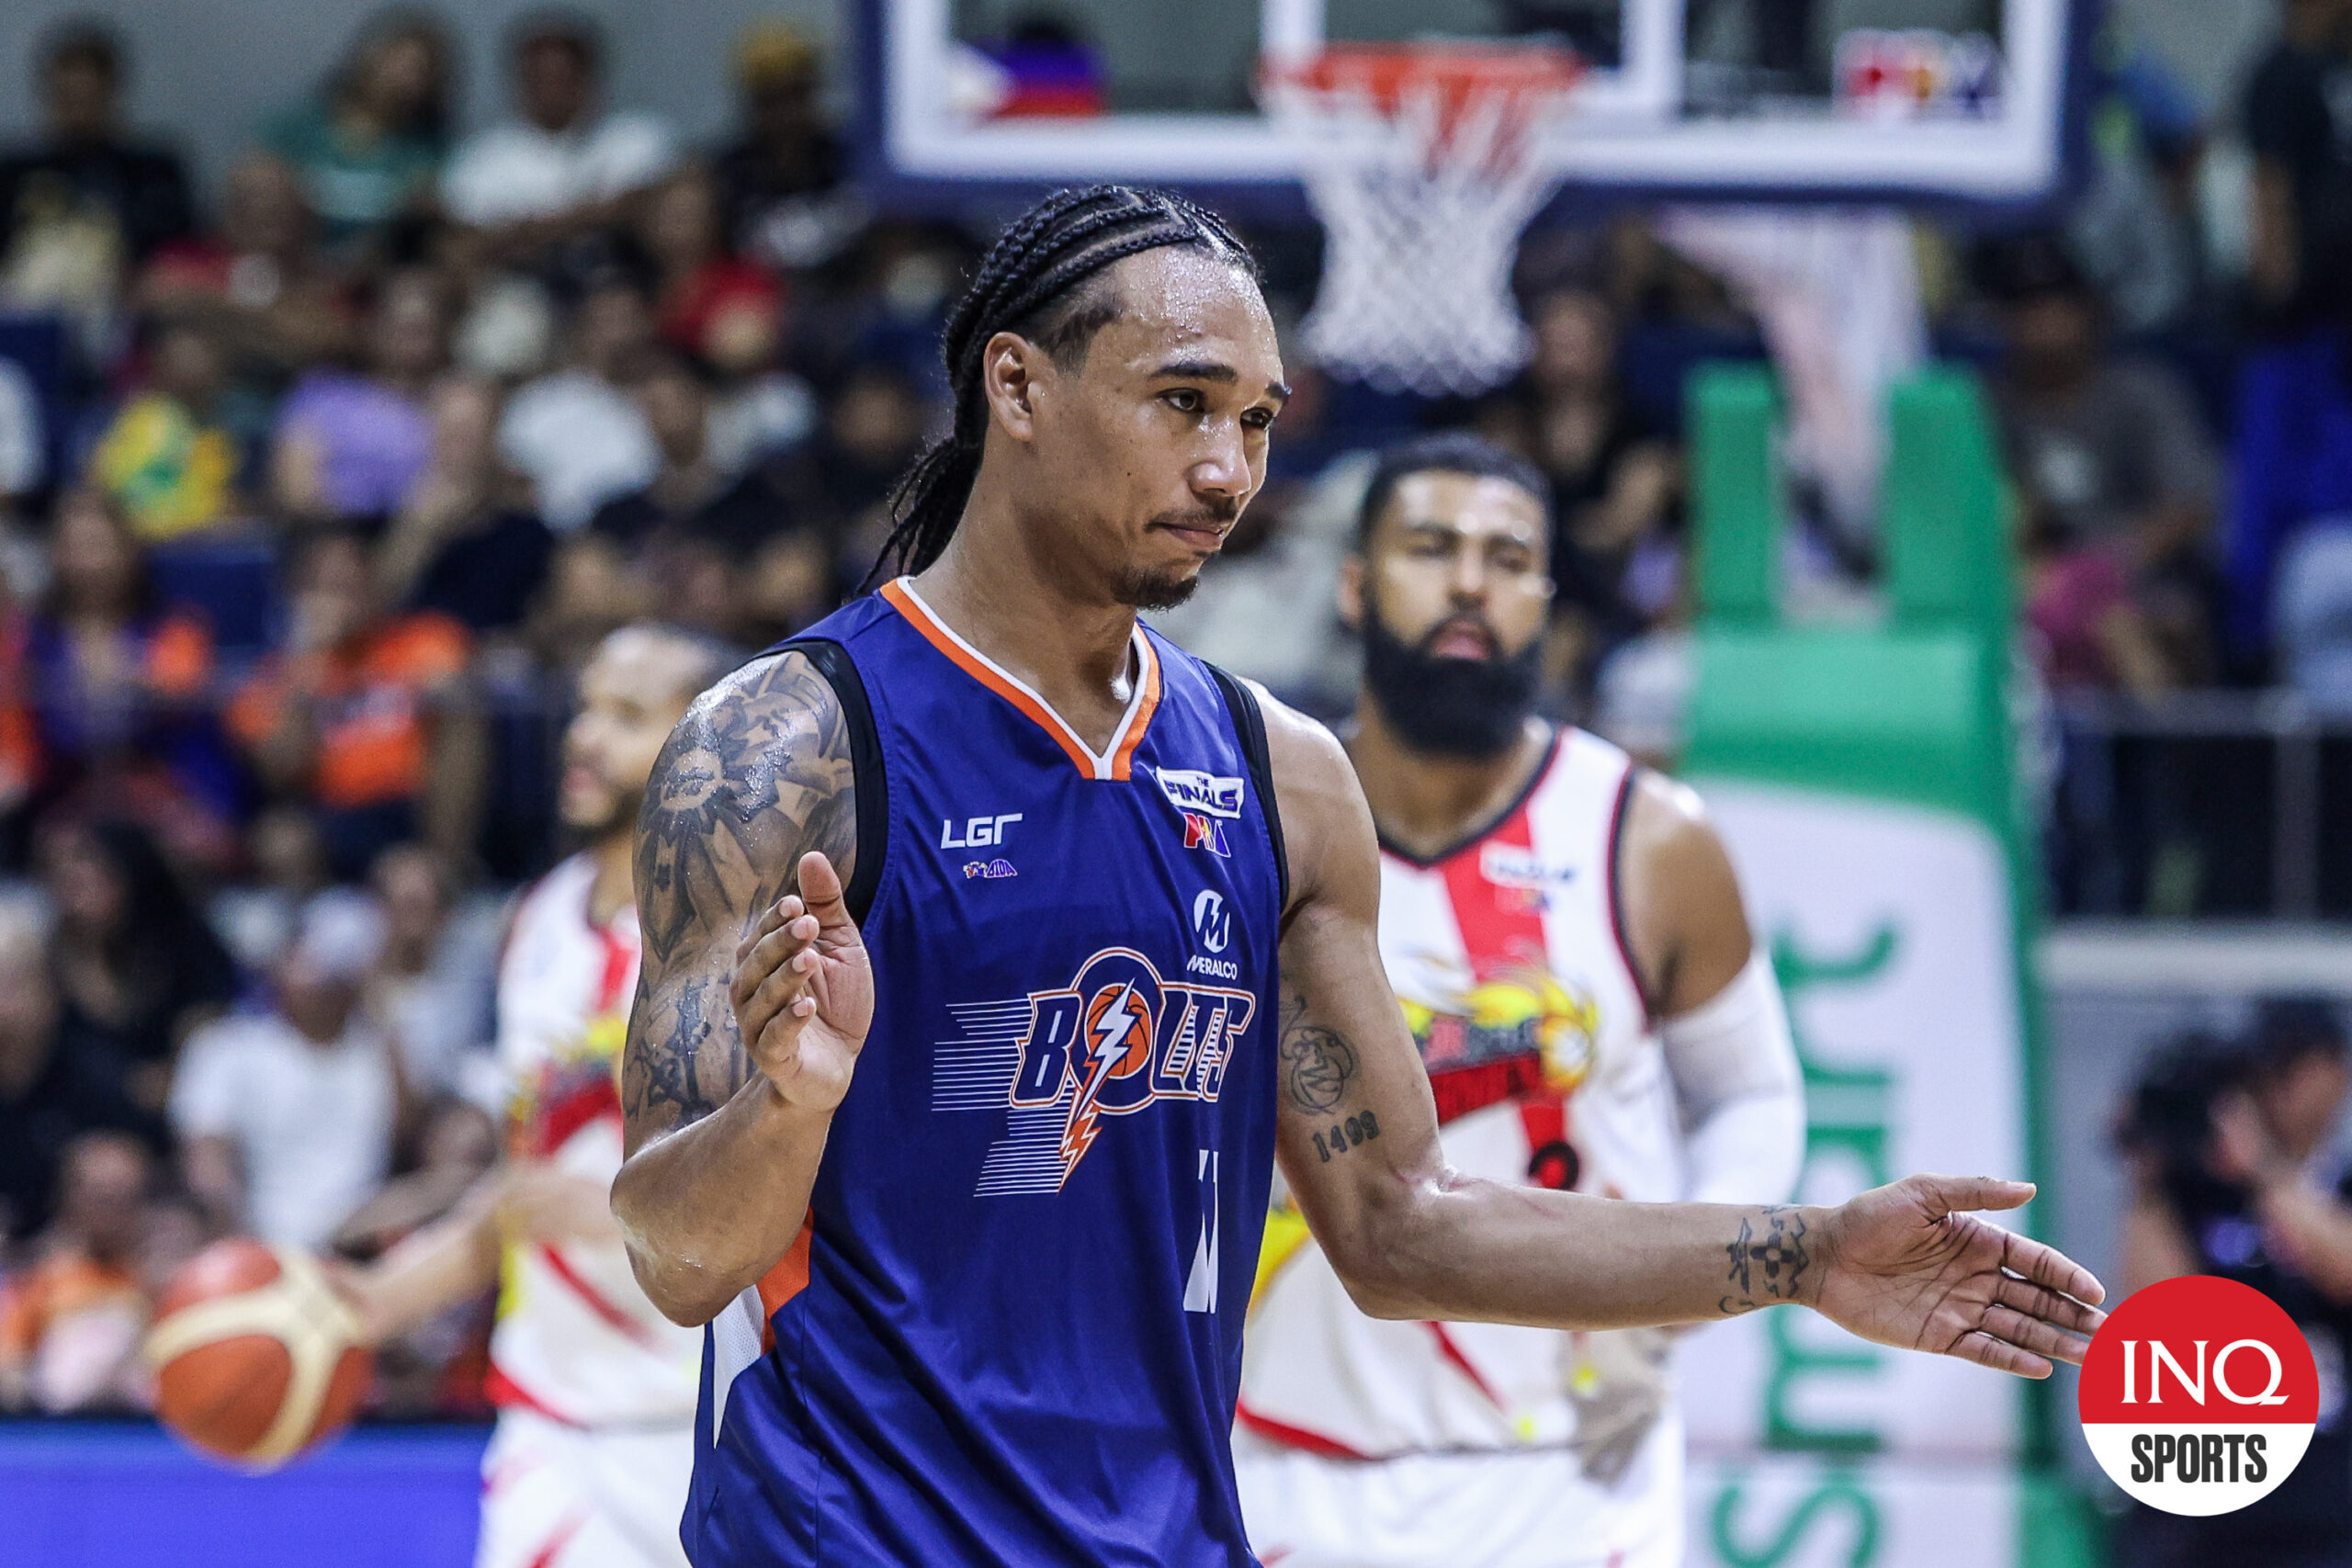 Meralco Bolts' Chris Newsome during Game 4 of the PBA Philippine Cup Finals against San Miguel Beermen.